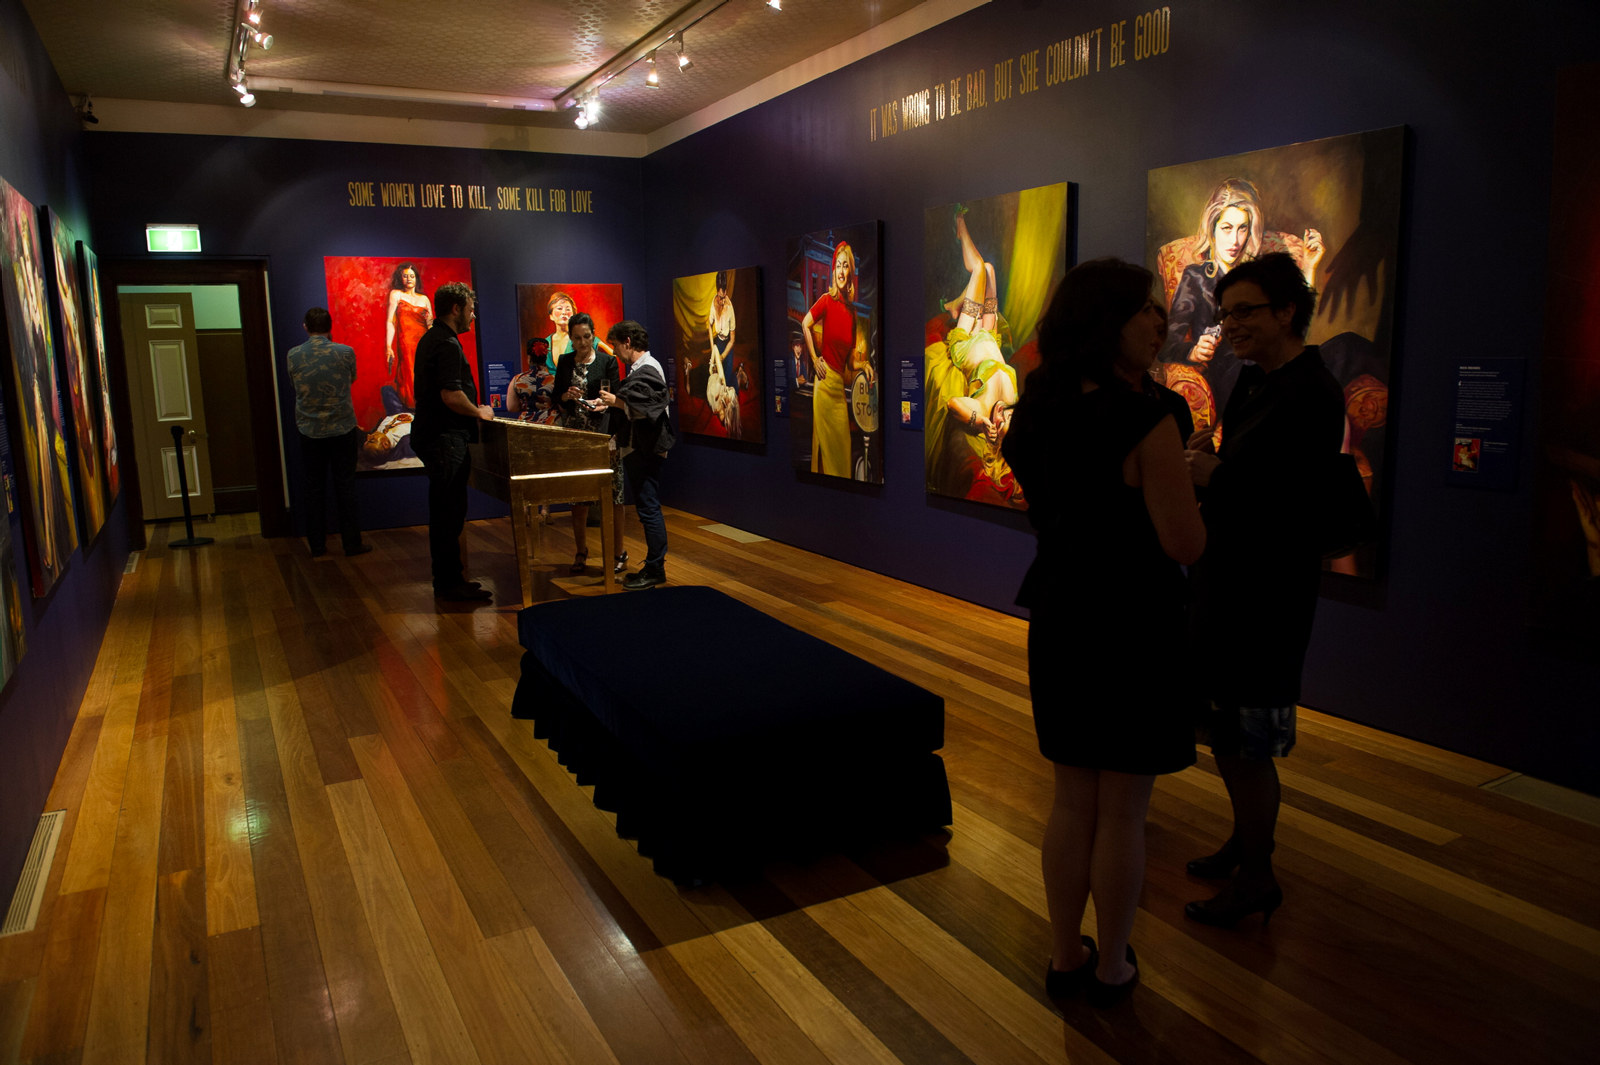 People milling around the main exhibition space during the opening of the exhibition. The room appears dimly lit with the paintings juming out.